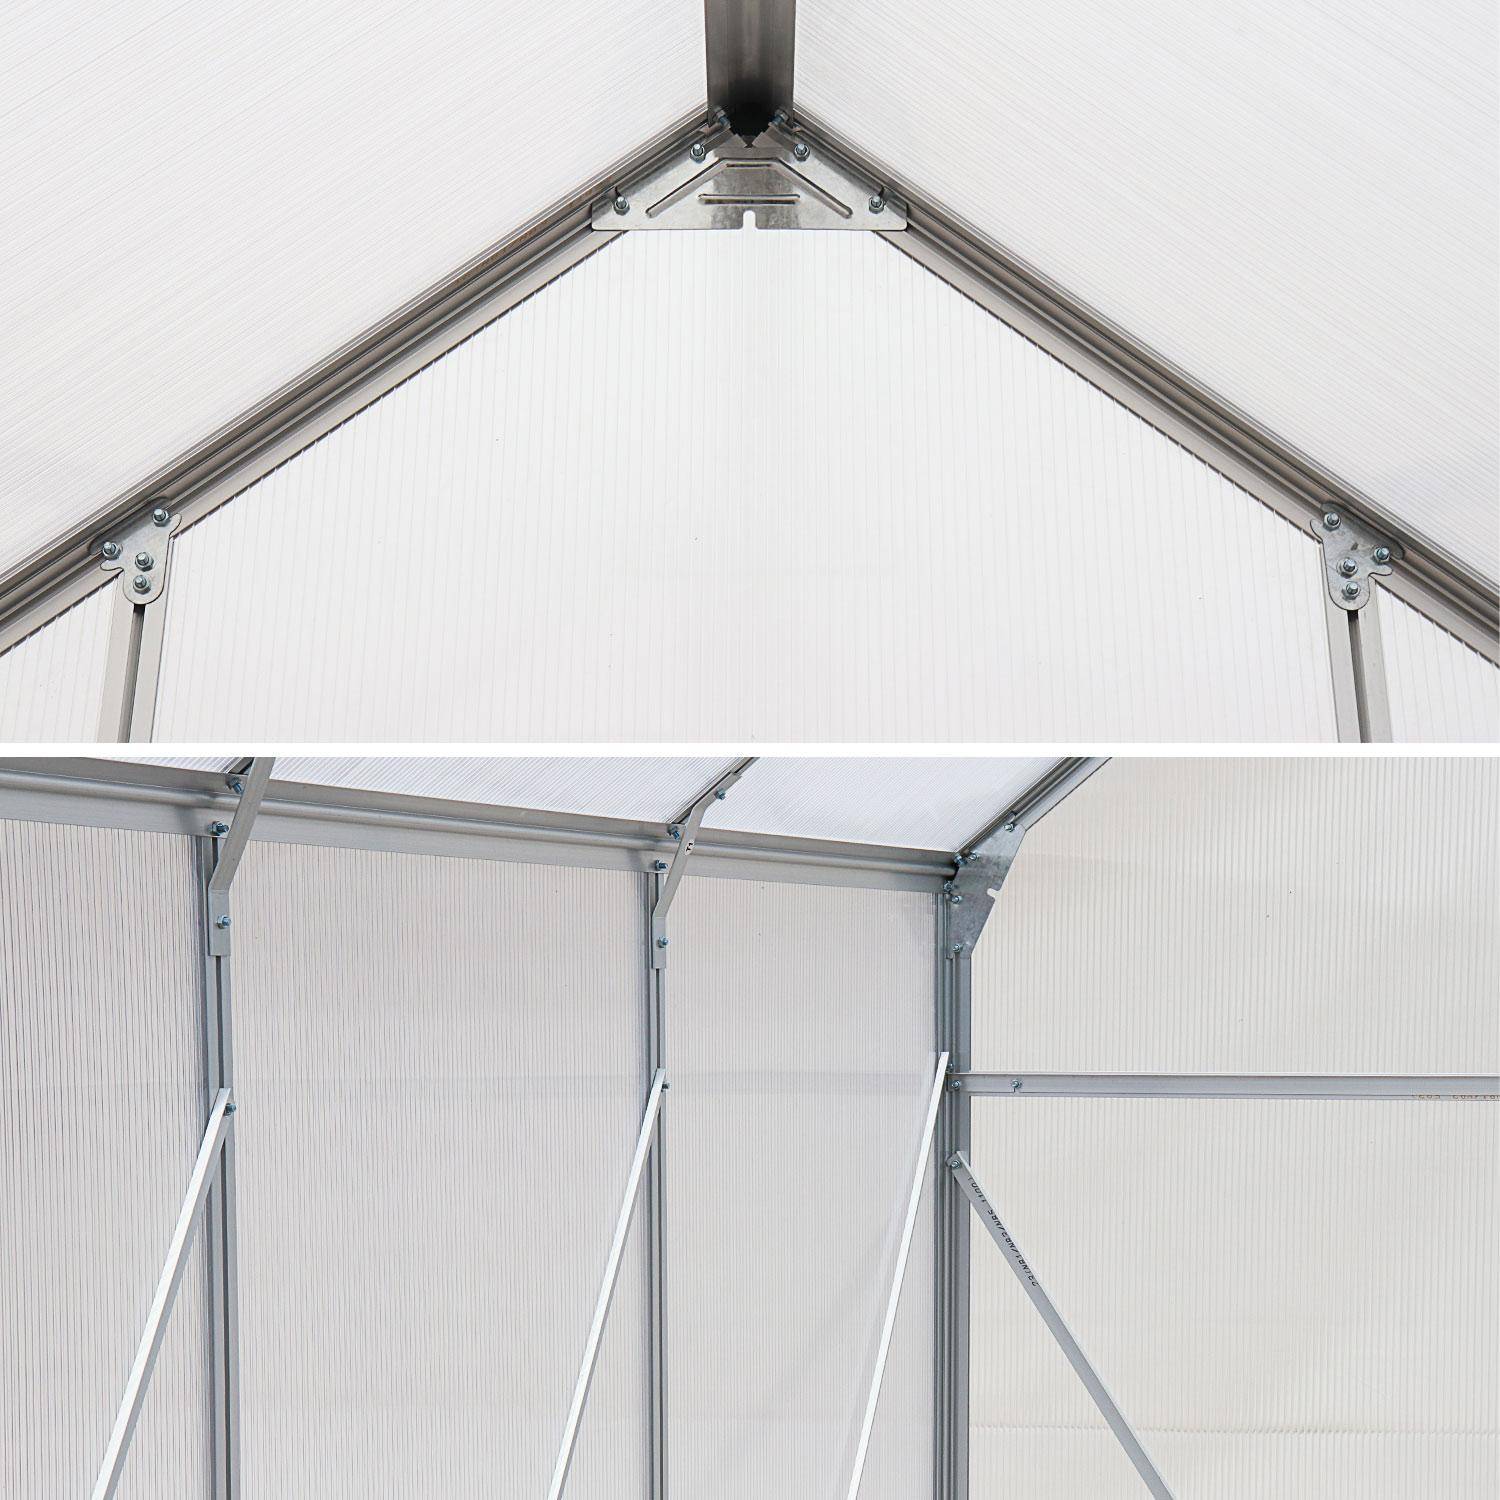 7m², 14x7FT polycarbonate (4mm) greenhouse with base frame - 2 skylights, gutter - Sapin - Grey,sweeek,Photo3